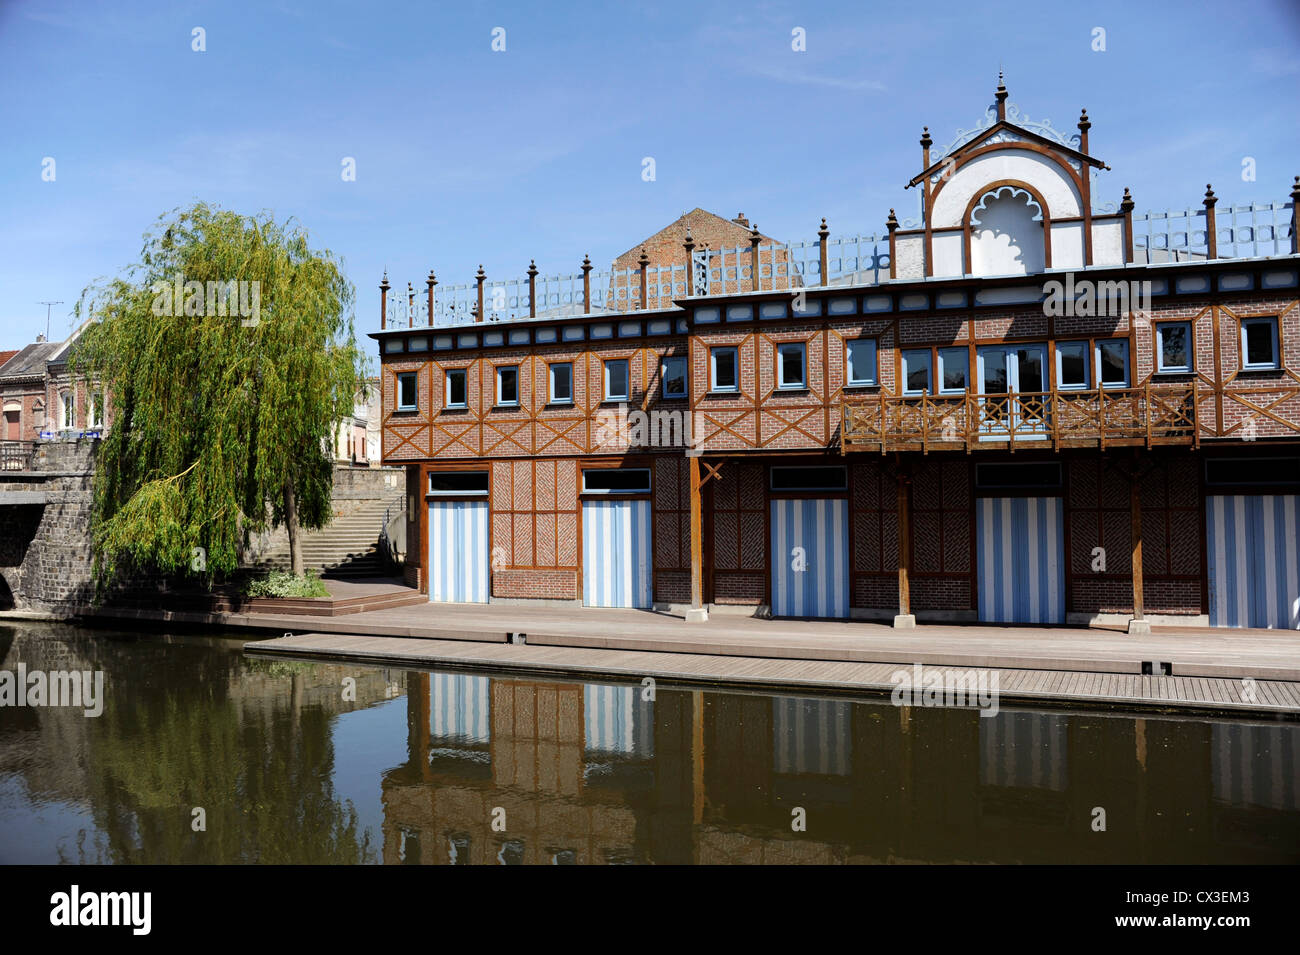 Sport Nautique Amiens, club house,Somme river,Amiens,Somme,Picardie,France Stock Photo